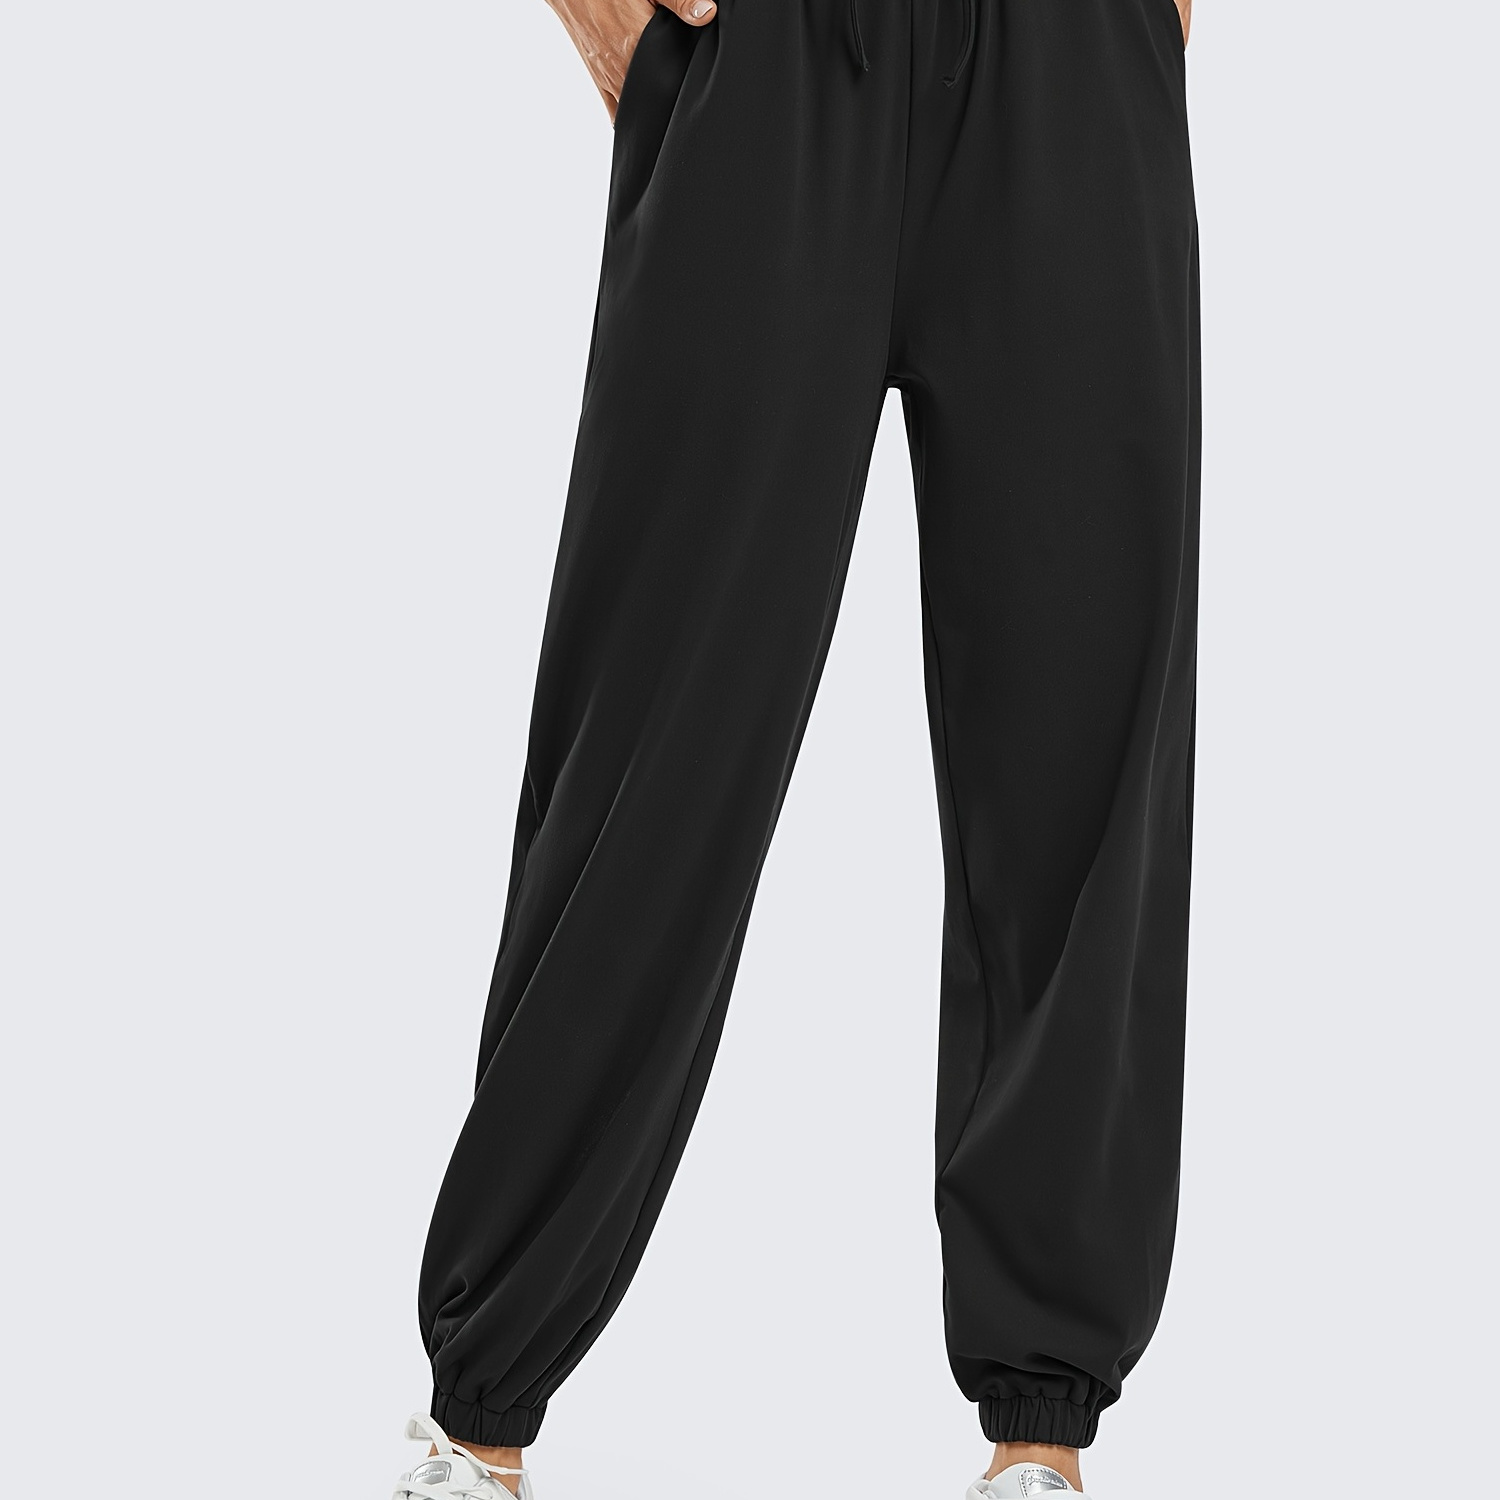 Sweatpants Women Plus Size Baggy High Waisted Loose Cute Solid Cinch Bottom  Jogger Sweatpant Pocketed